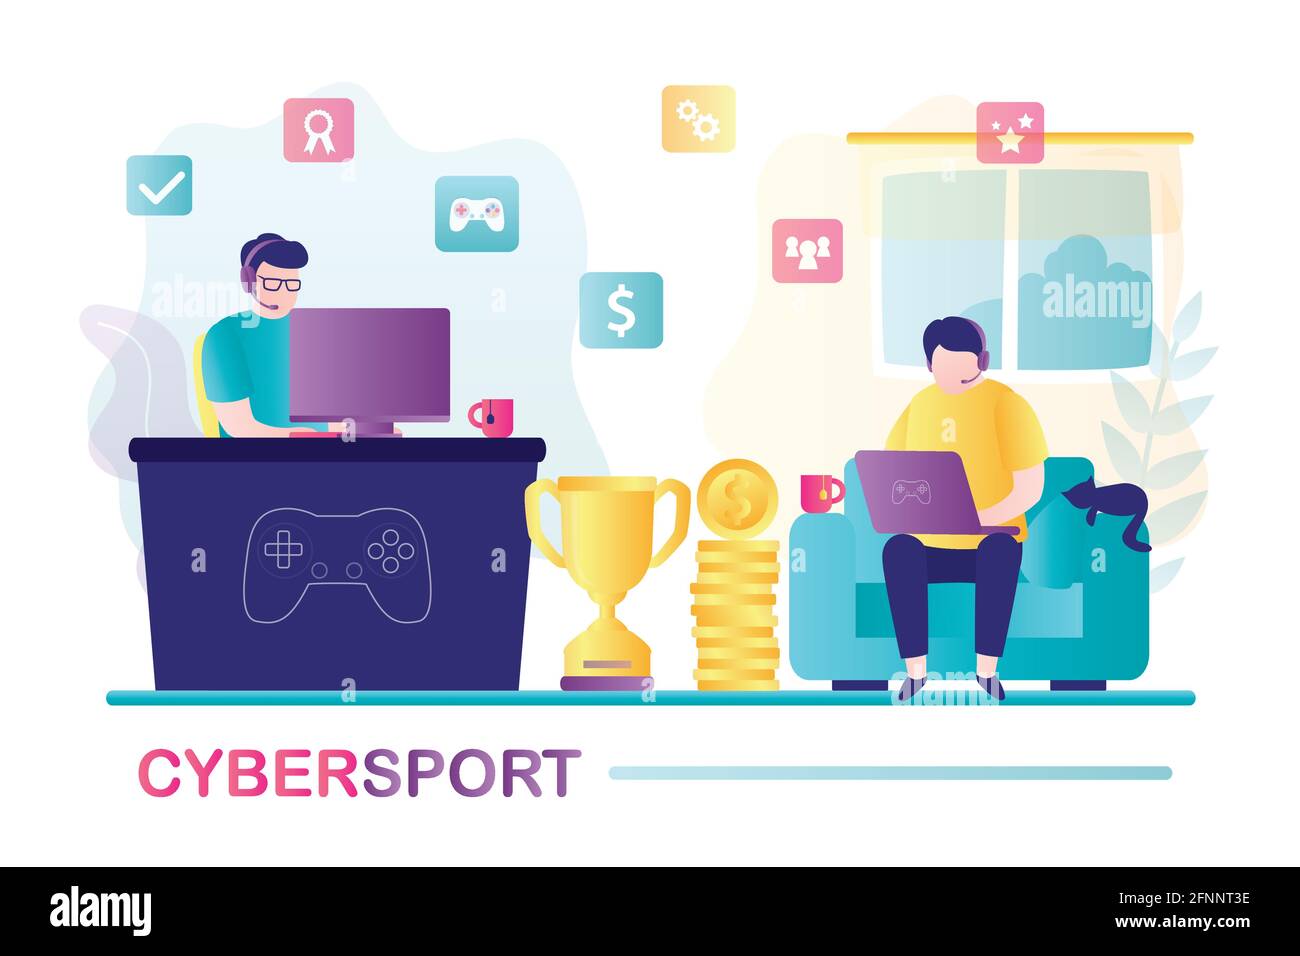 Male characters earns on video games. Concept of e-sports and virtual tournament. Competition between two cybersports players. Professional gamers in Stock Vector